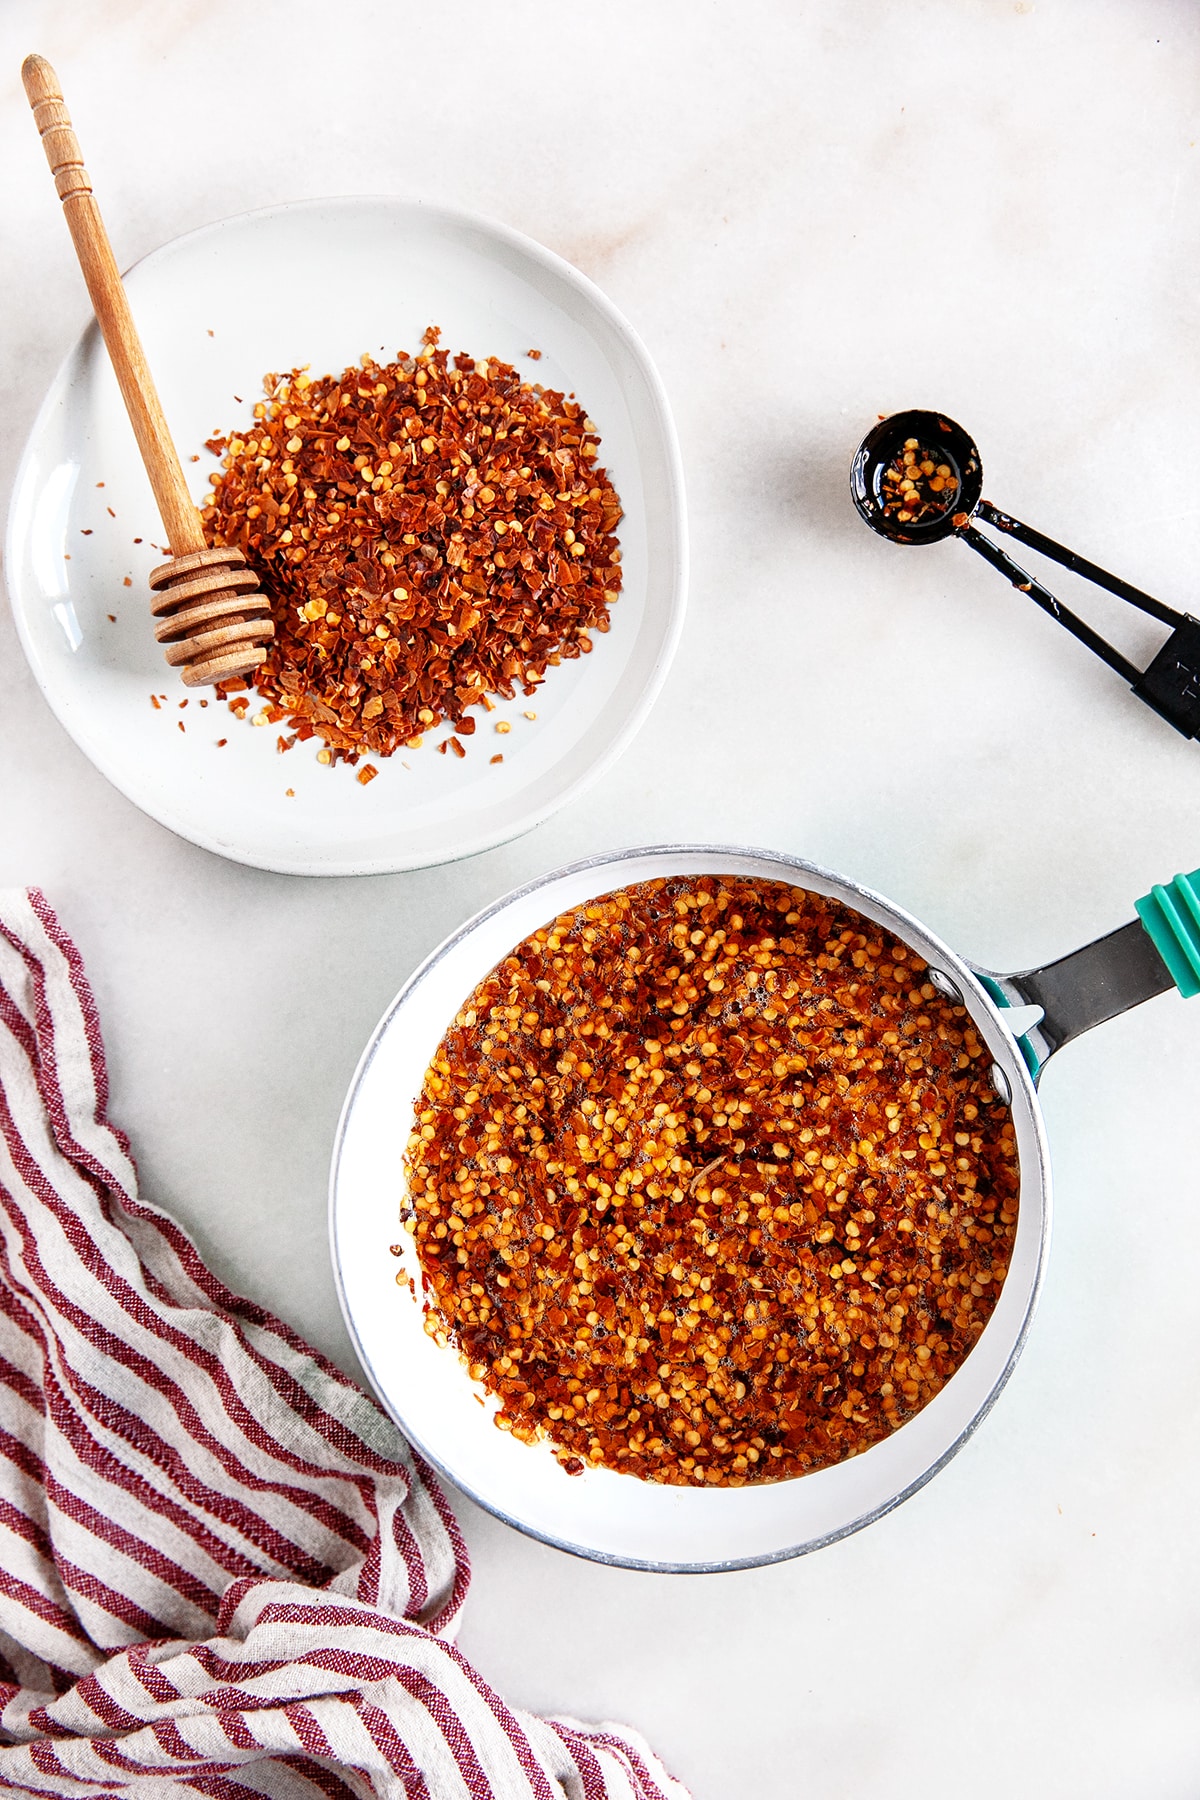 Overhead view of hot honey in a pot with chili flakes and a plate of chili flakes and a measuring spoon. 